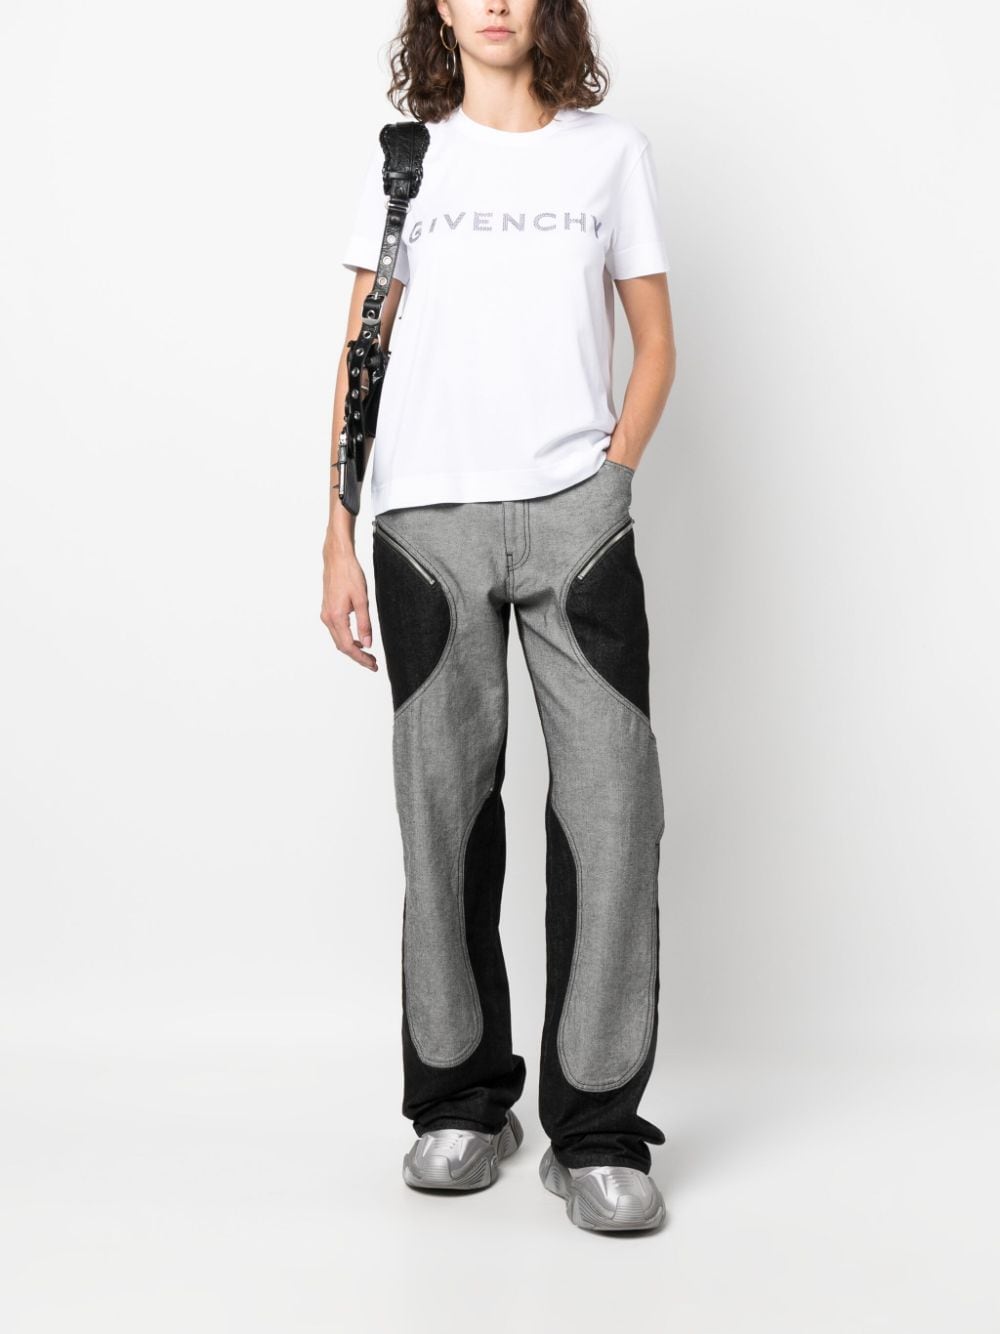 Givenchy T-shirt met logo Wit